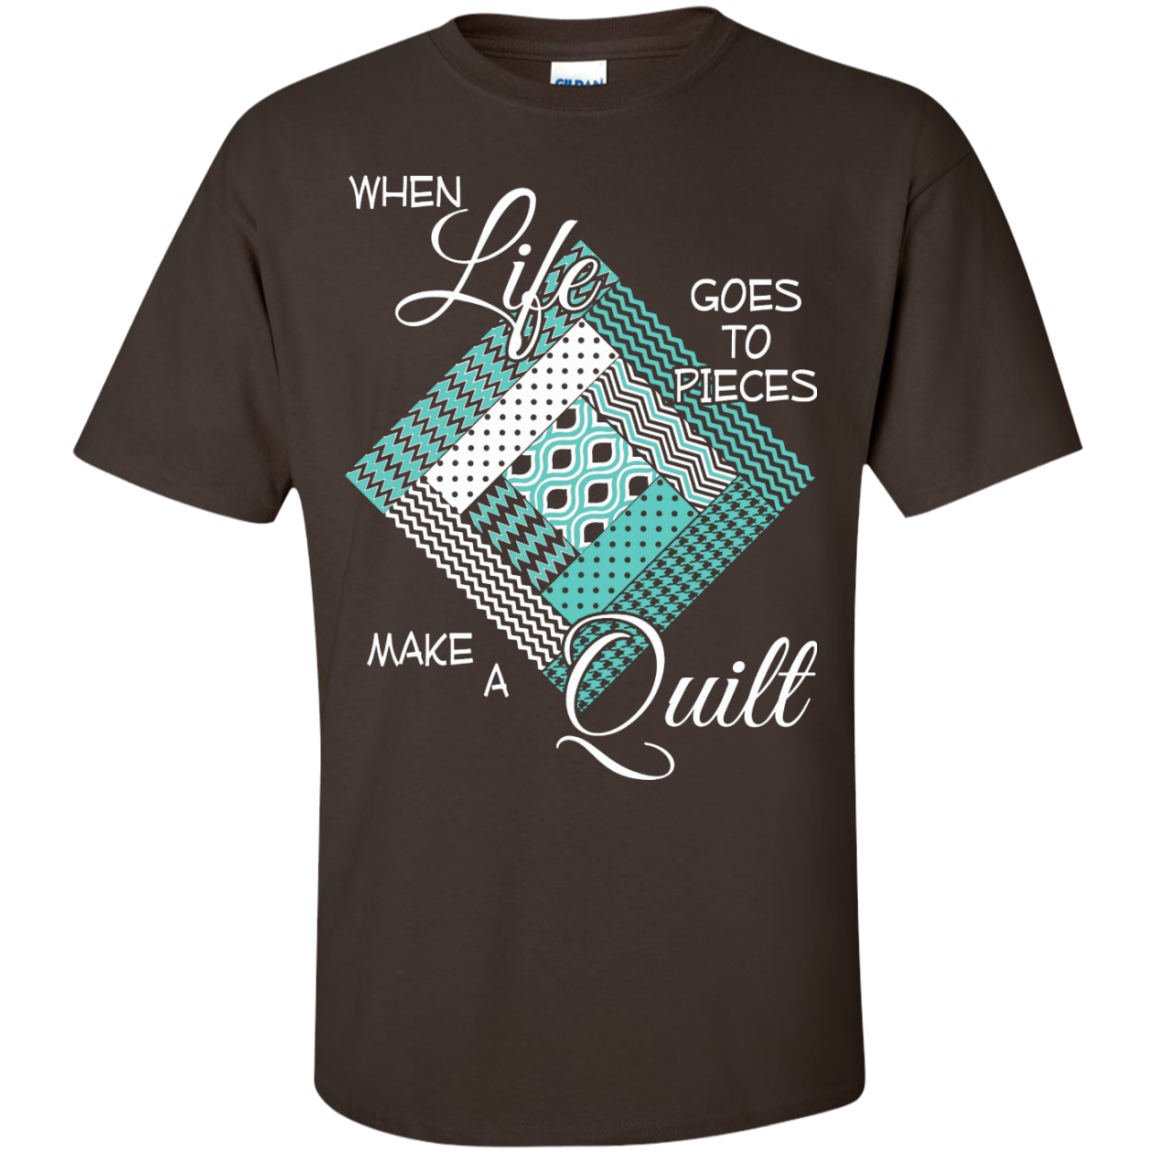 Make a Quilt (turquoise) Custom Ultra Cotton T-Shirt - Crafter4Life - 4